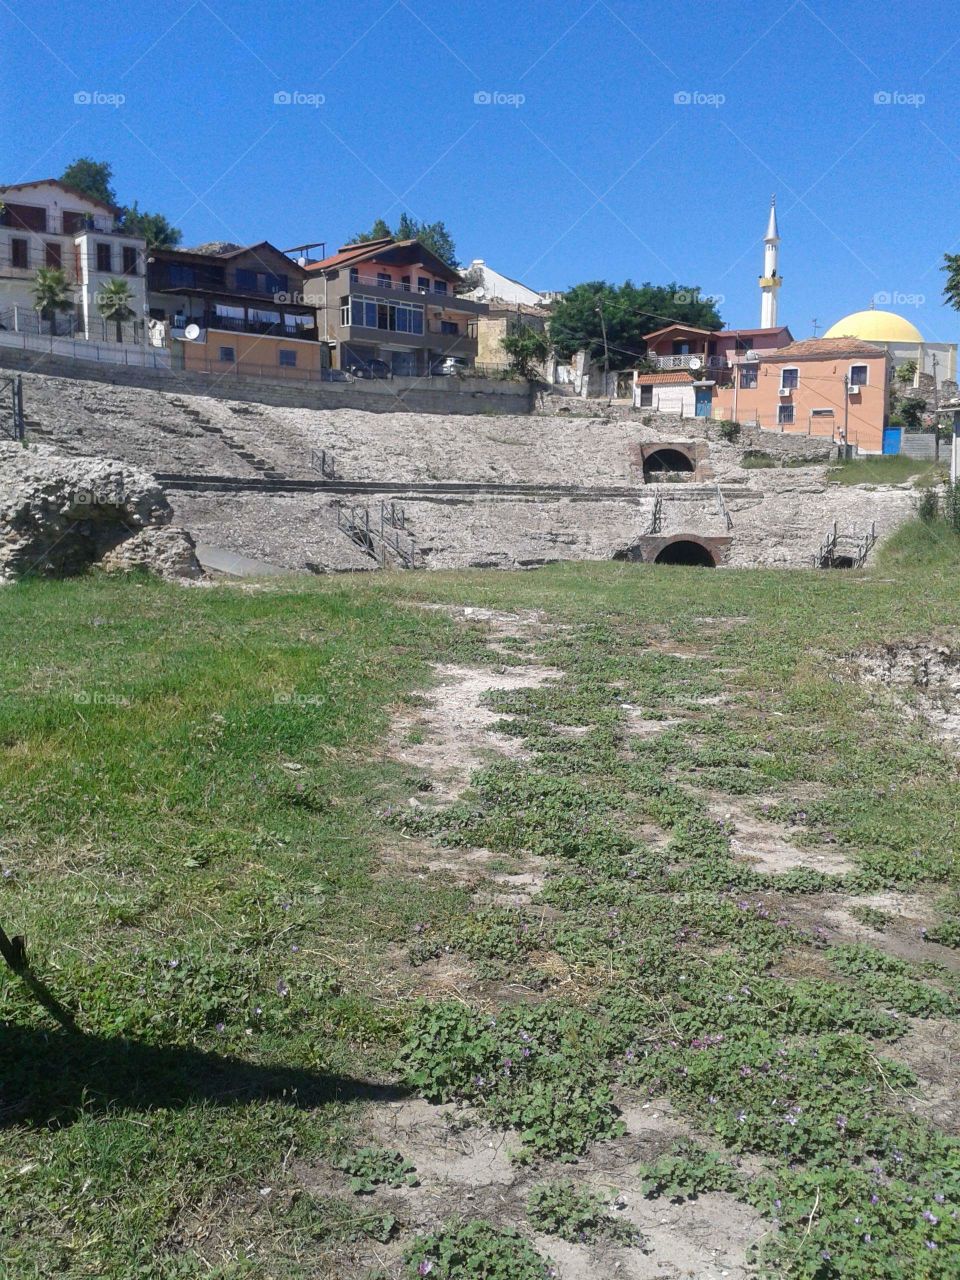 Ancient Roman Amphitheatre in Durrës - Albania
at least my trip to Albania in summer of the 2015 was worth